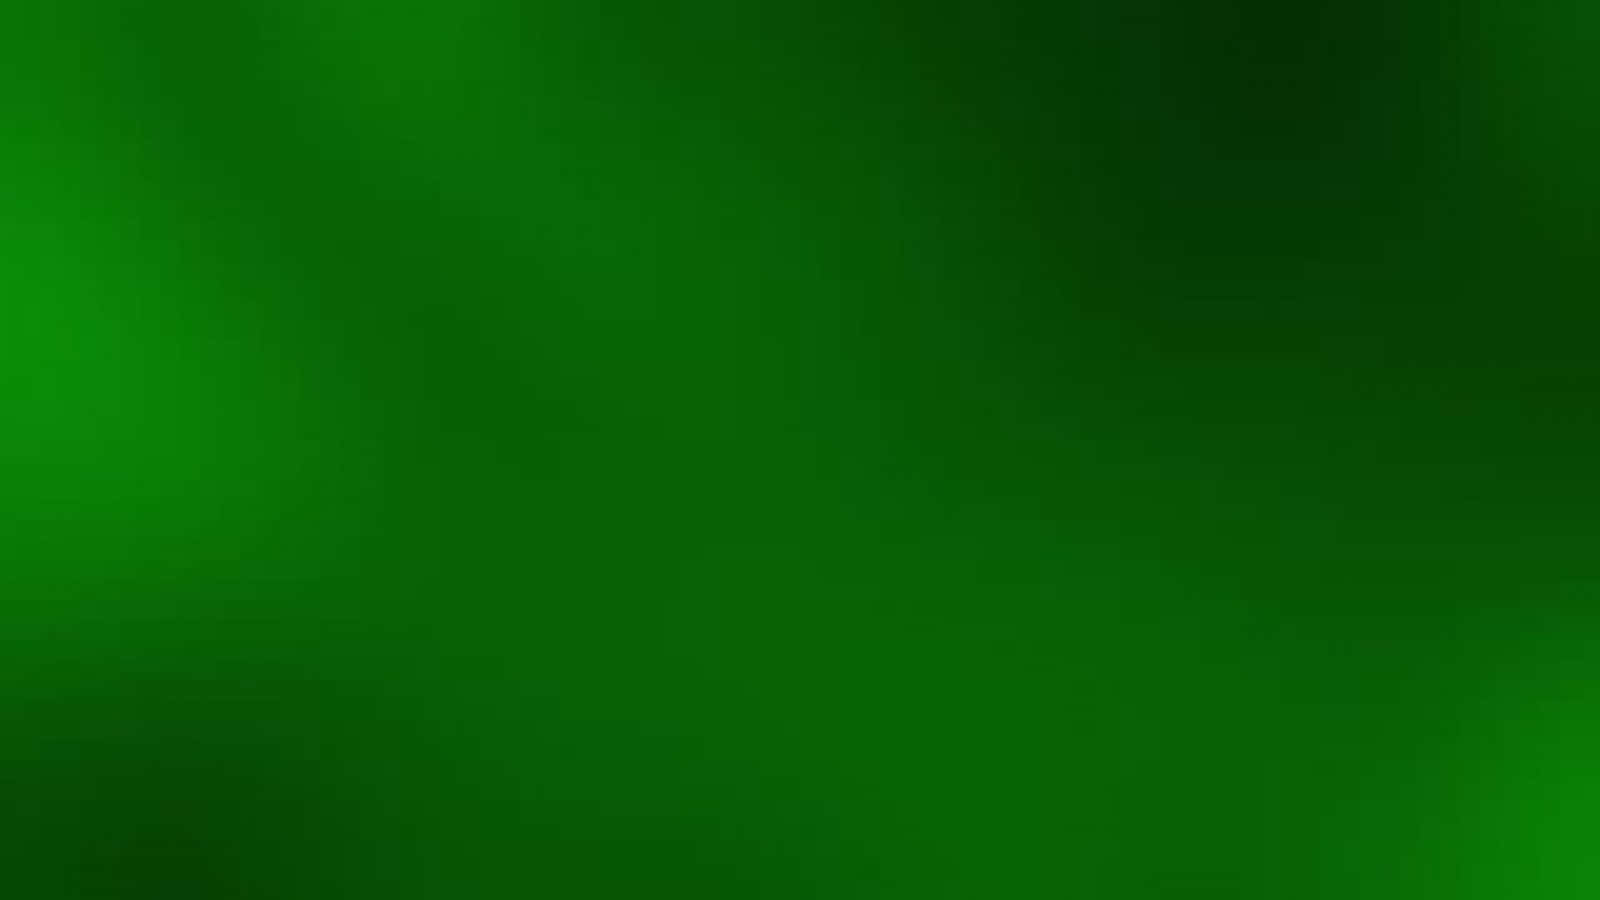 simple green backgrounds